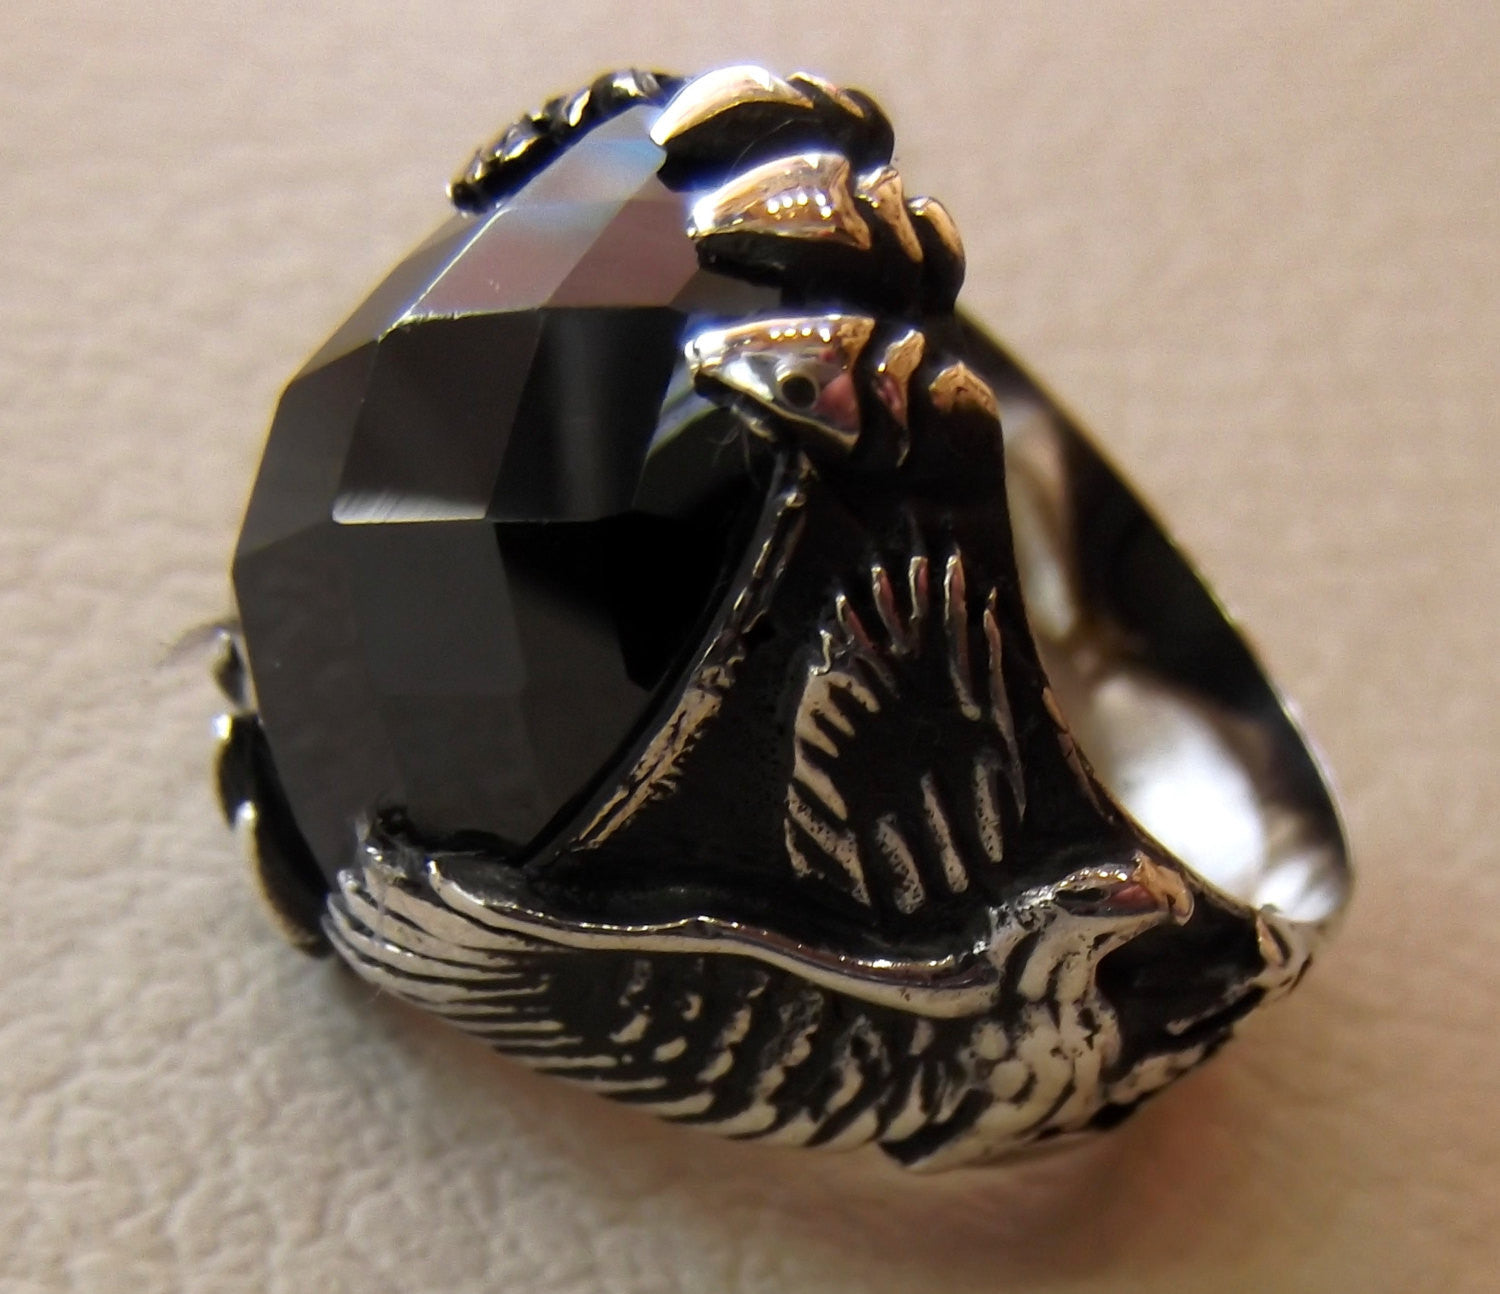 onyx eagle ring black agate gem natural oval stone sterling silver 925 men animal jewelry any size free shipping oxidized antique style